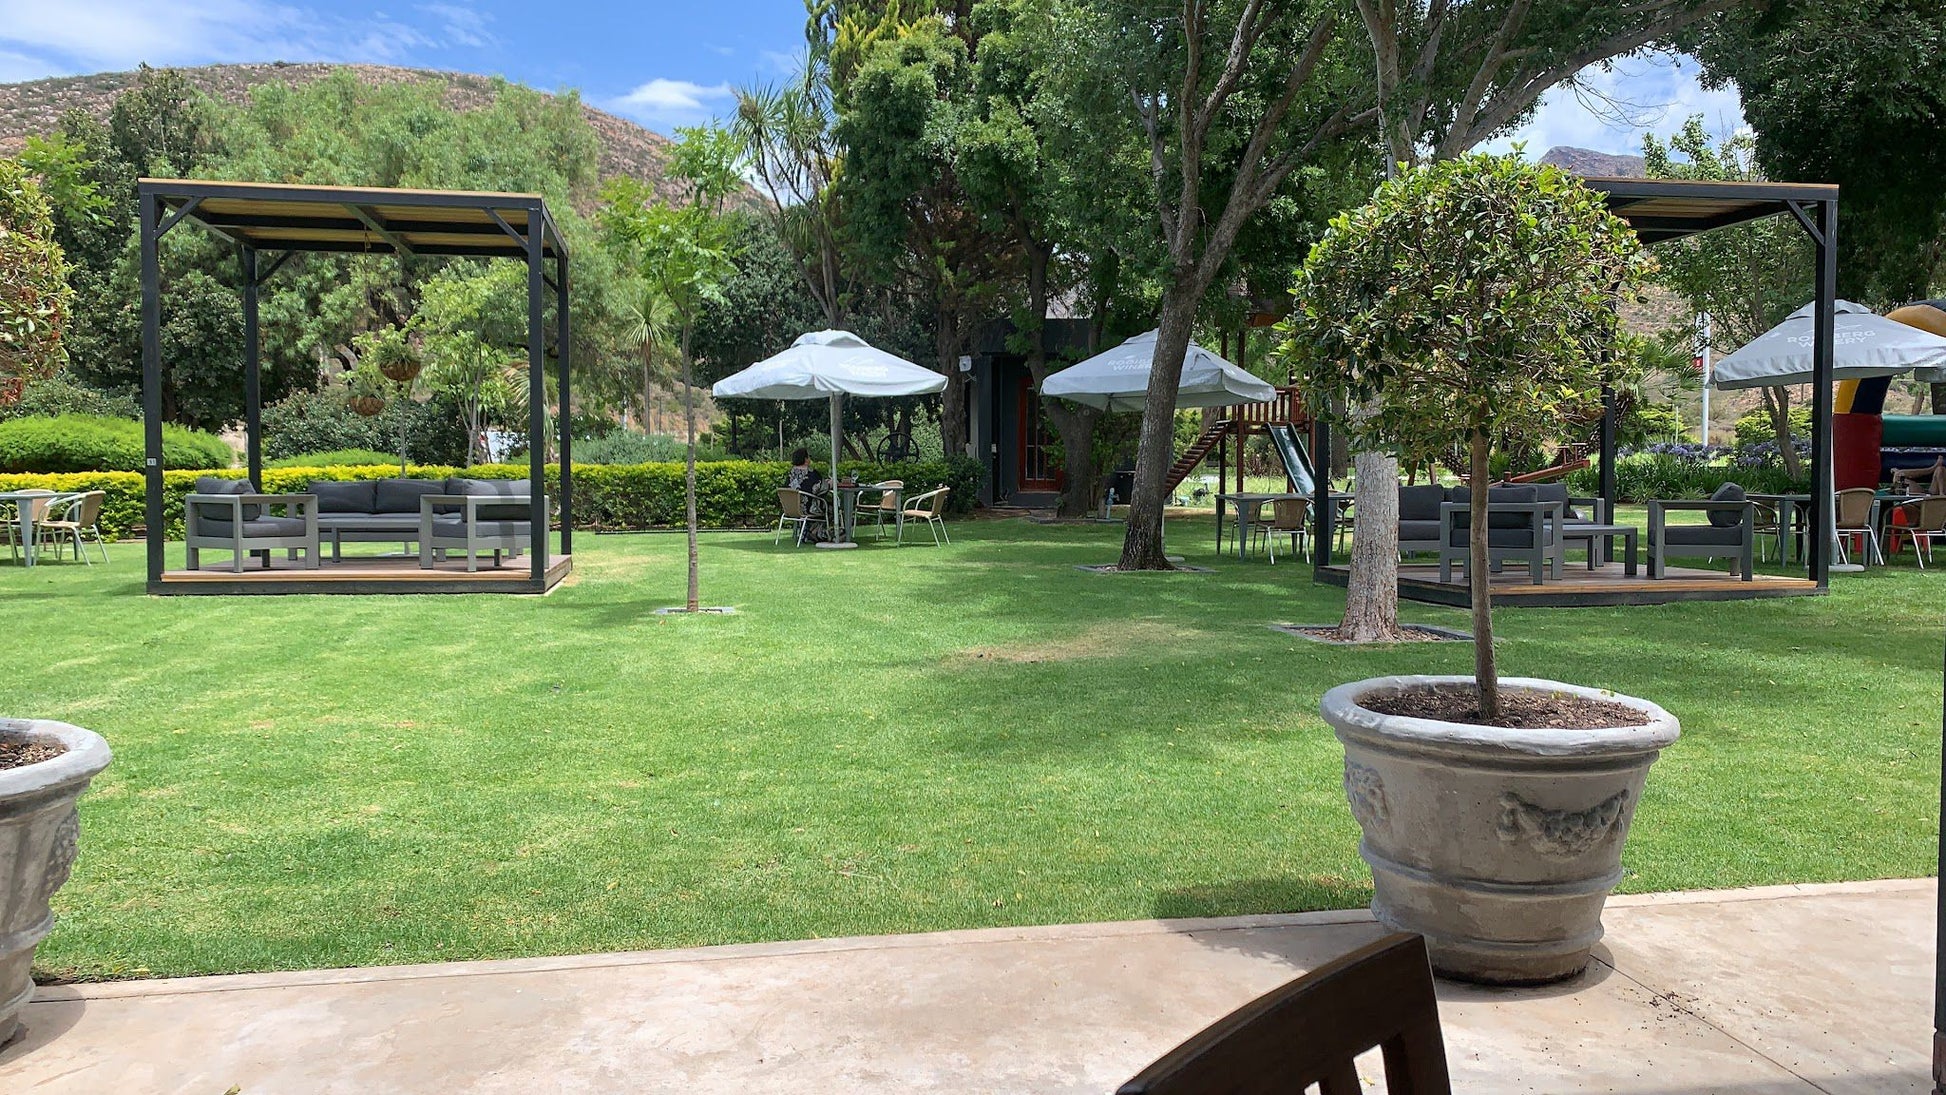  Rooiberg Winery (Bistro hours differ)